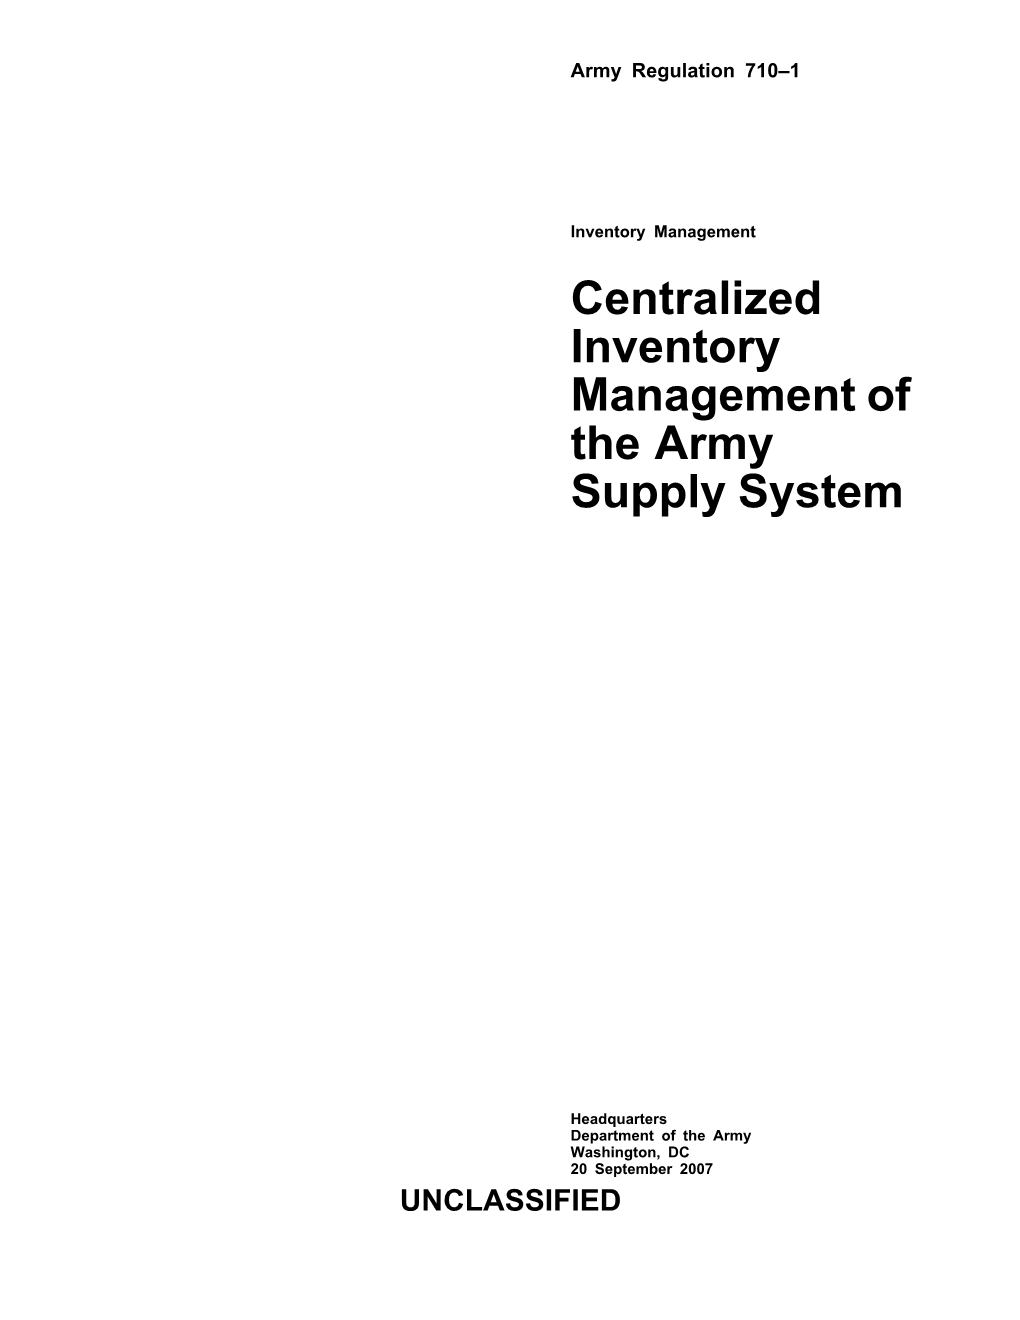 Centralized Inventory Management of the Army Supply System